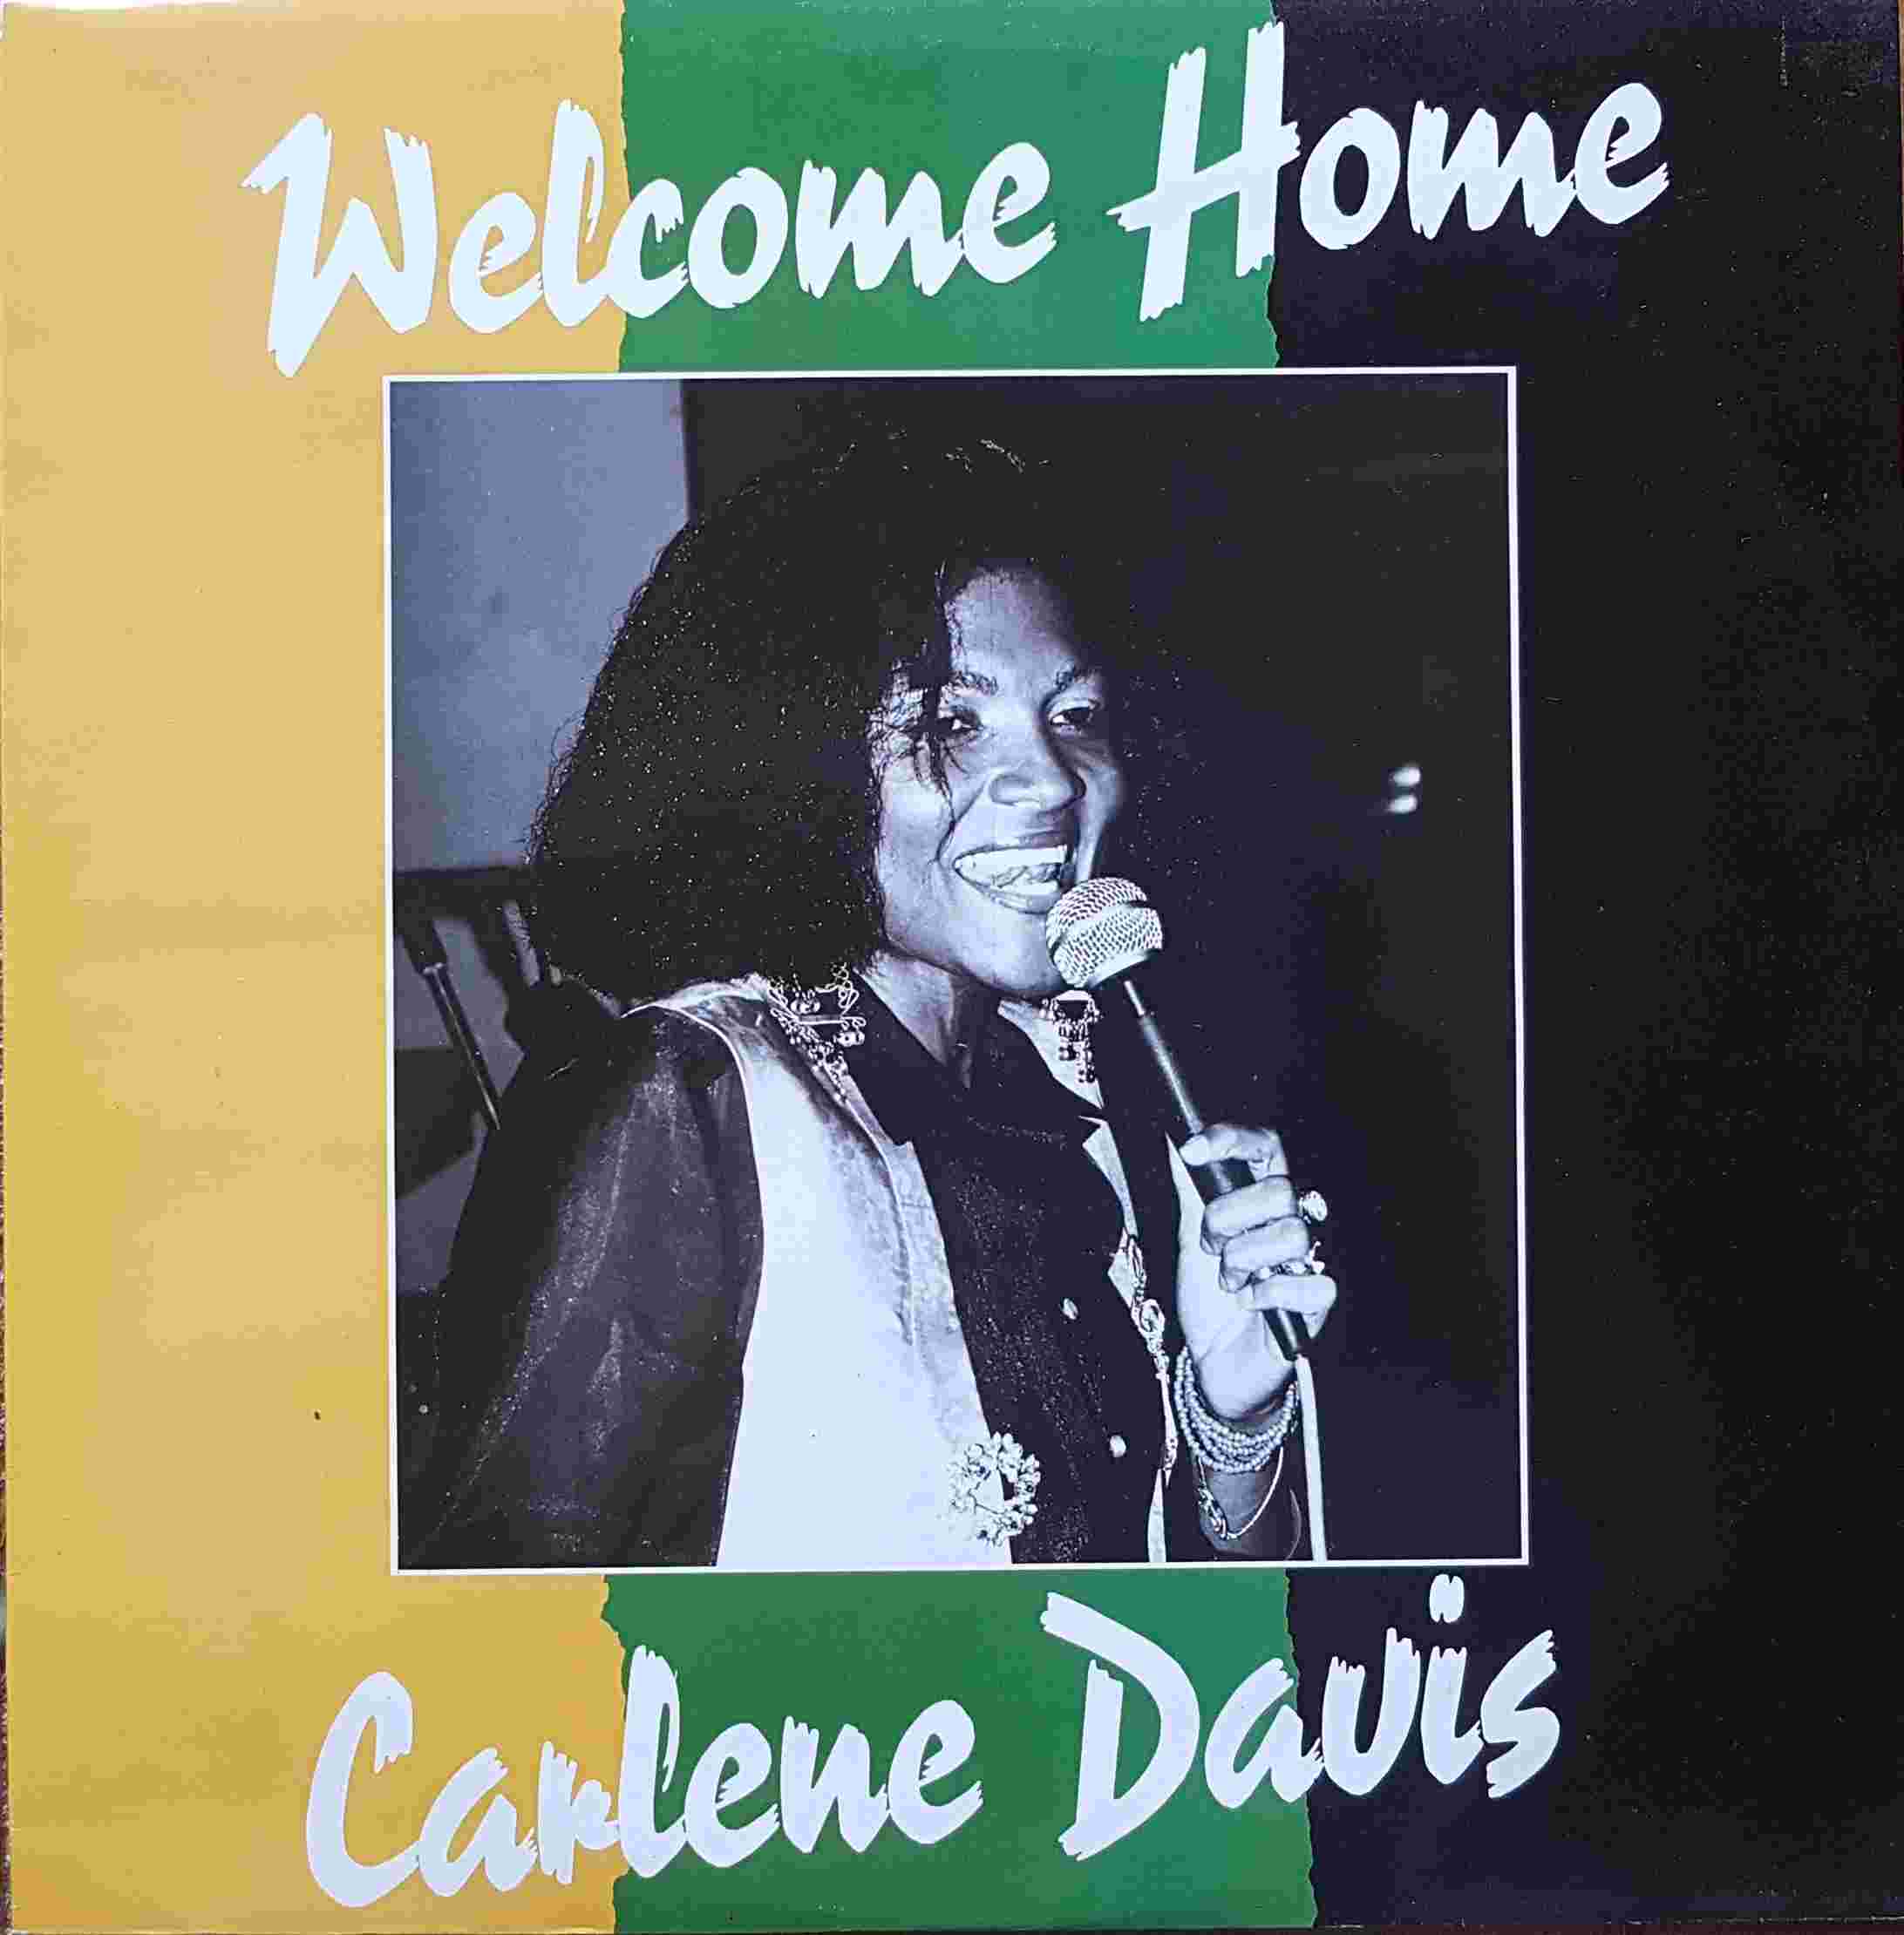 Picture of 12 RSL 244 Welcome home by artist Tommy Cowan / Carlene Davis from the BBC records and Tapes library